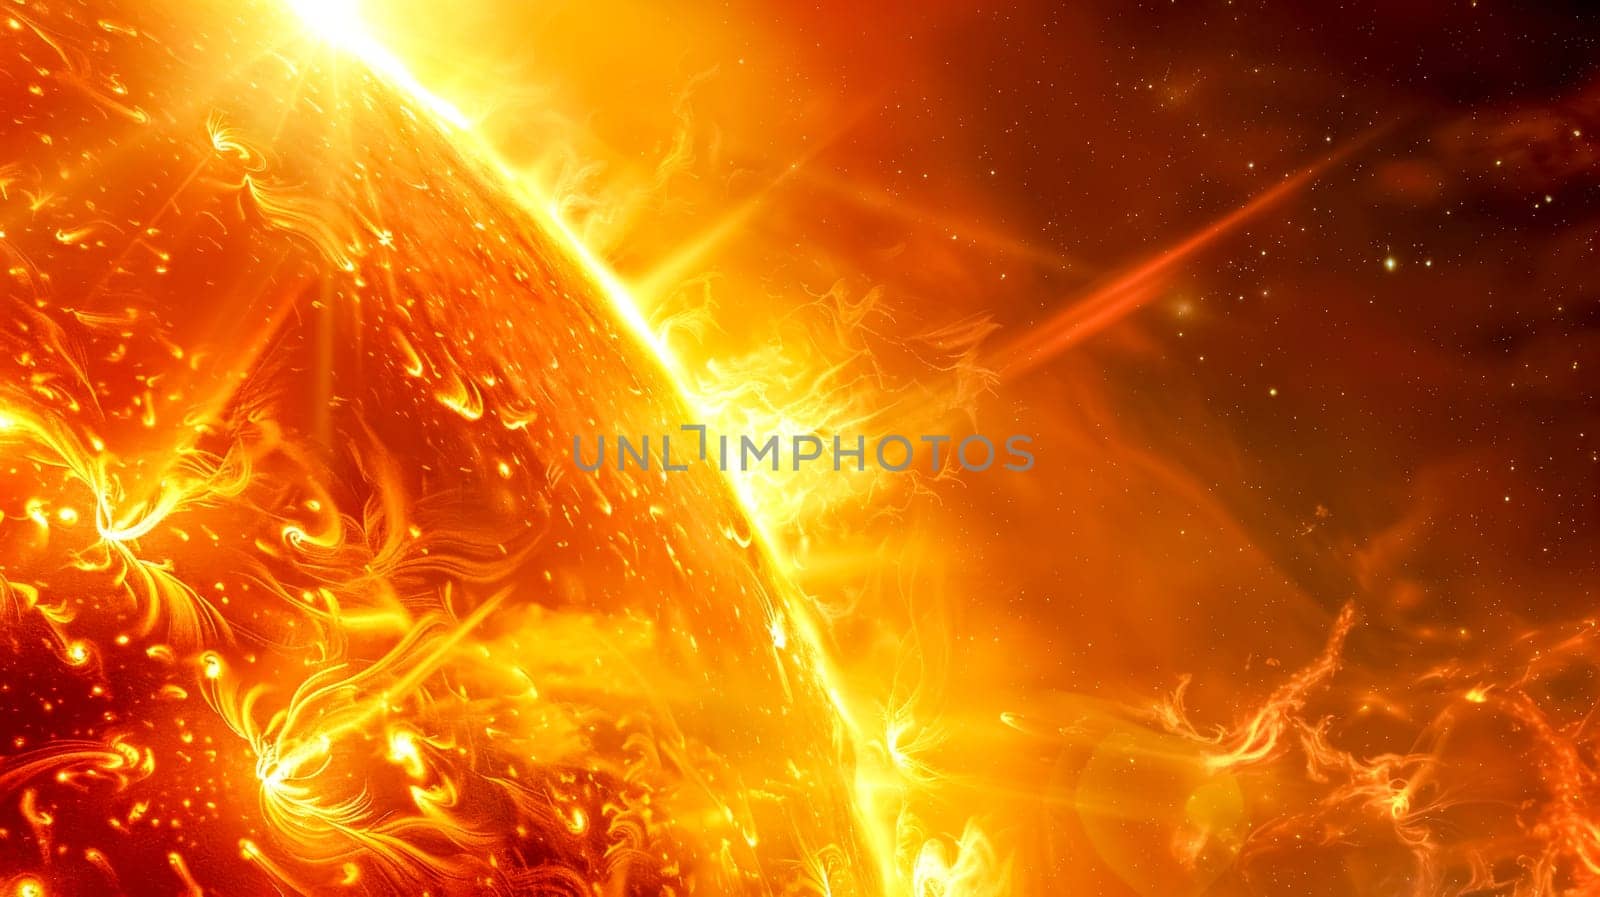 Fiery sun surface with solar flares by Edophoto